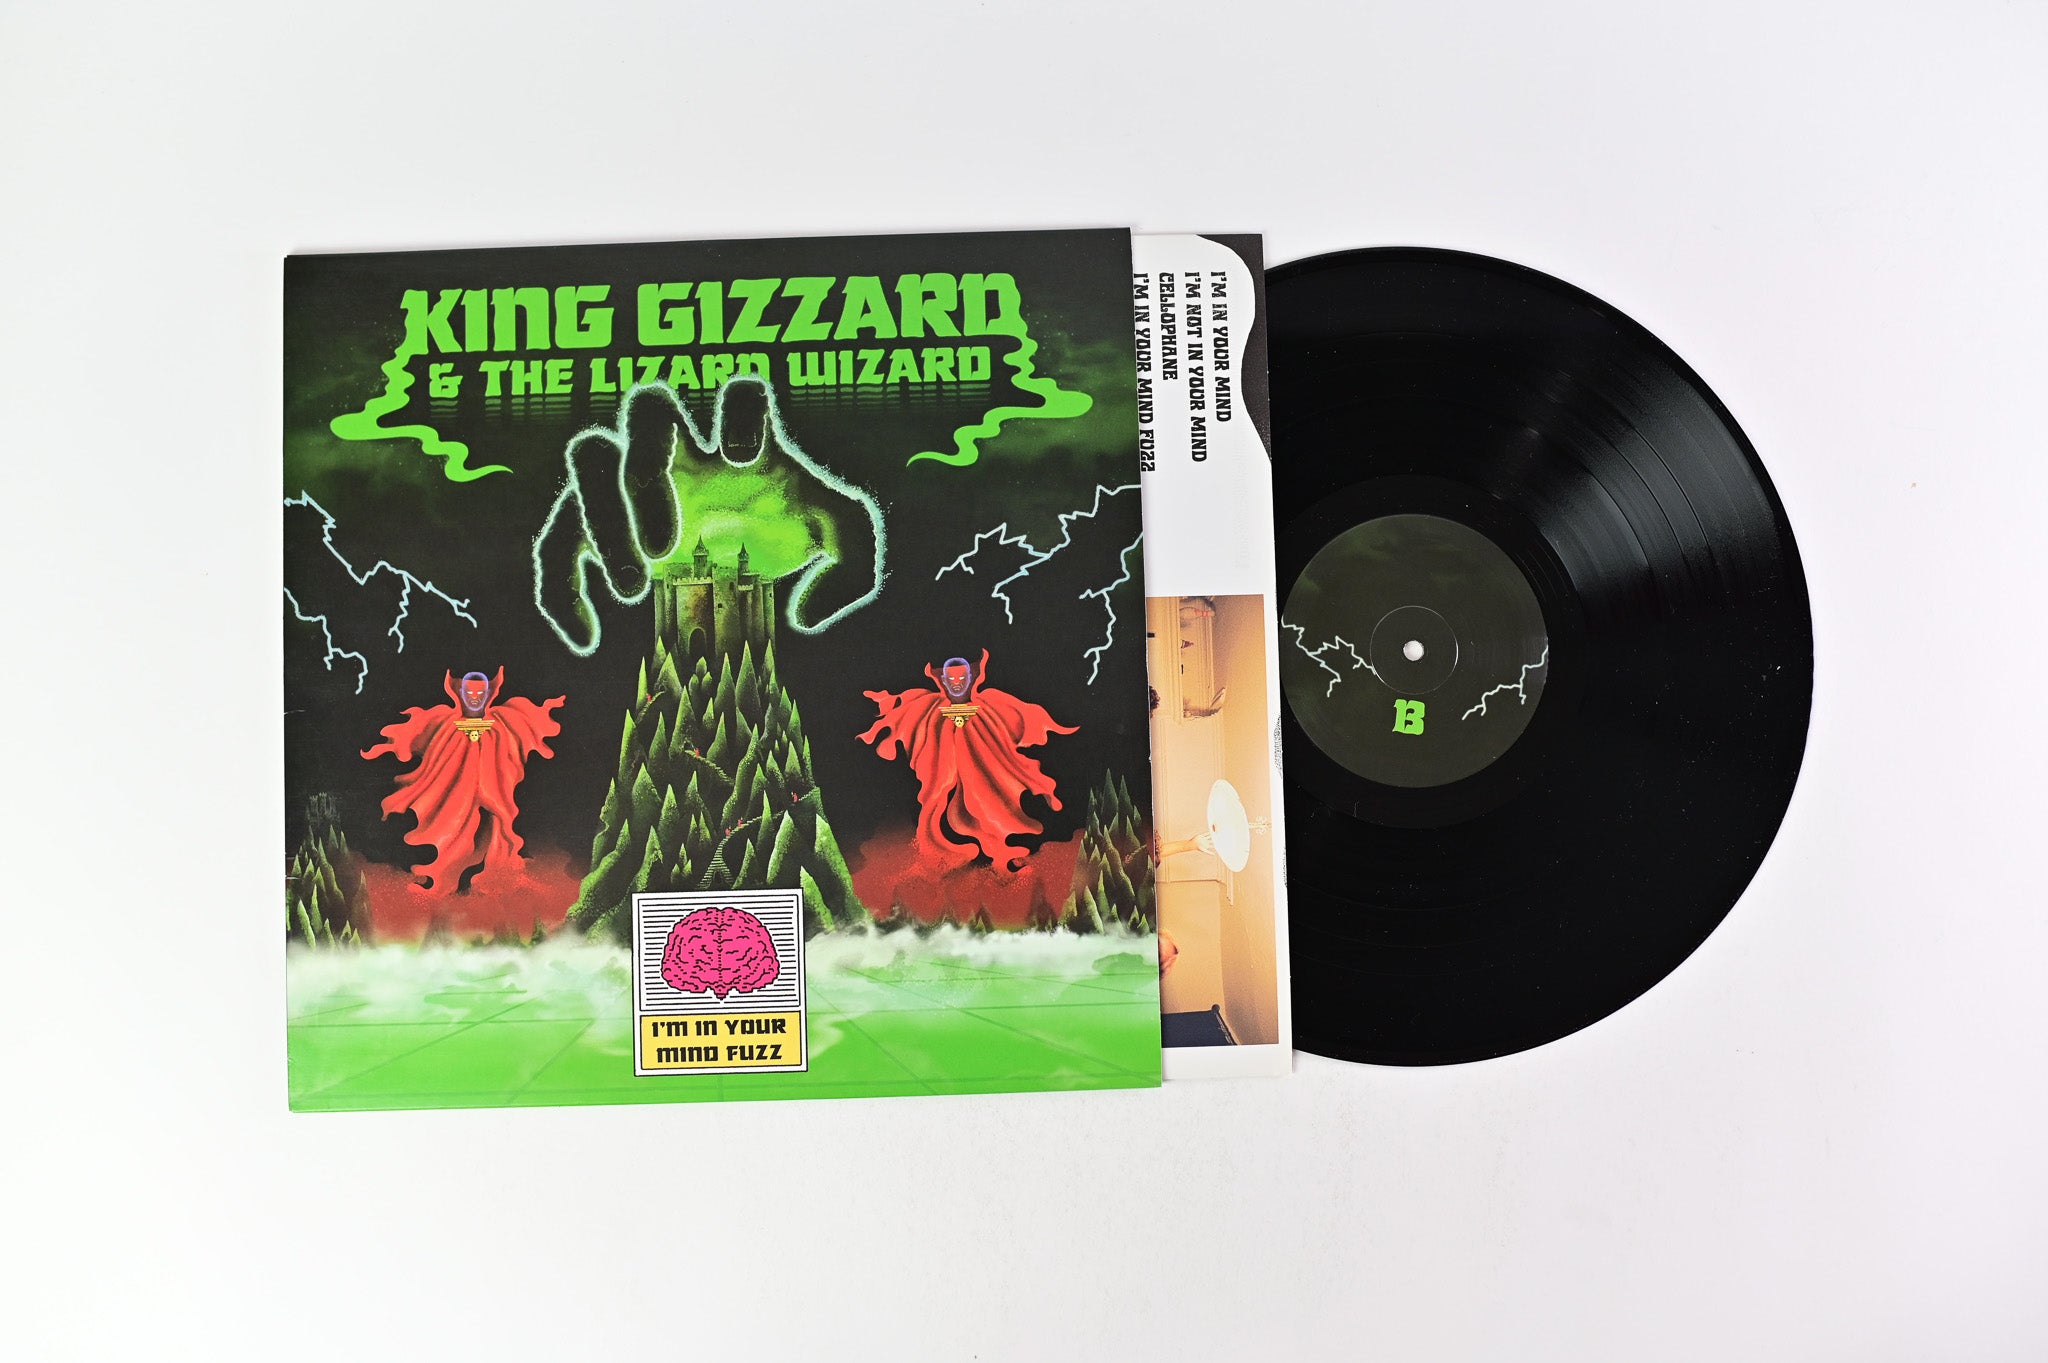 King Gizzard And The Lizard Wizard - I'm In Your Mind Fuzz on Castle Face